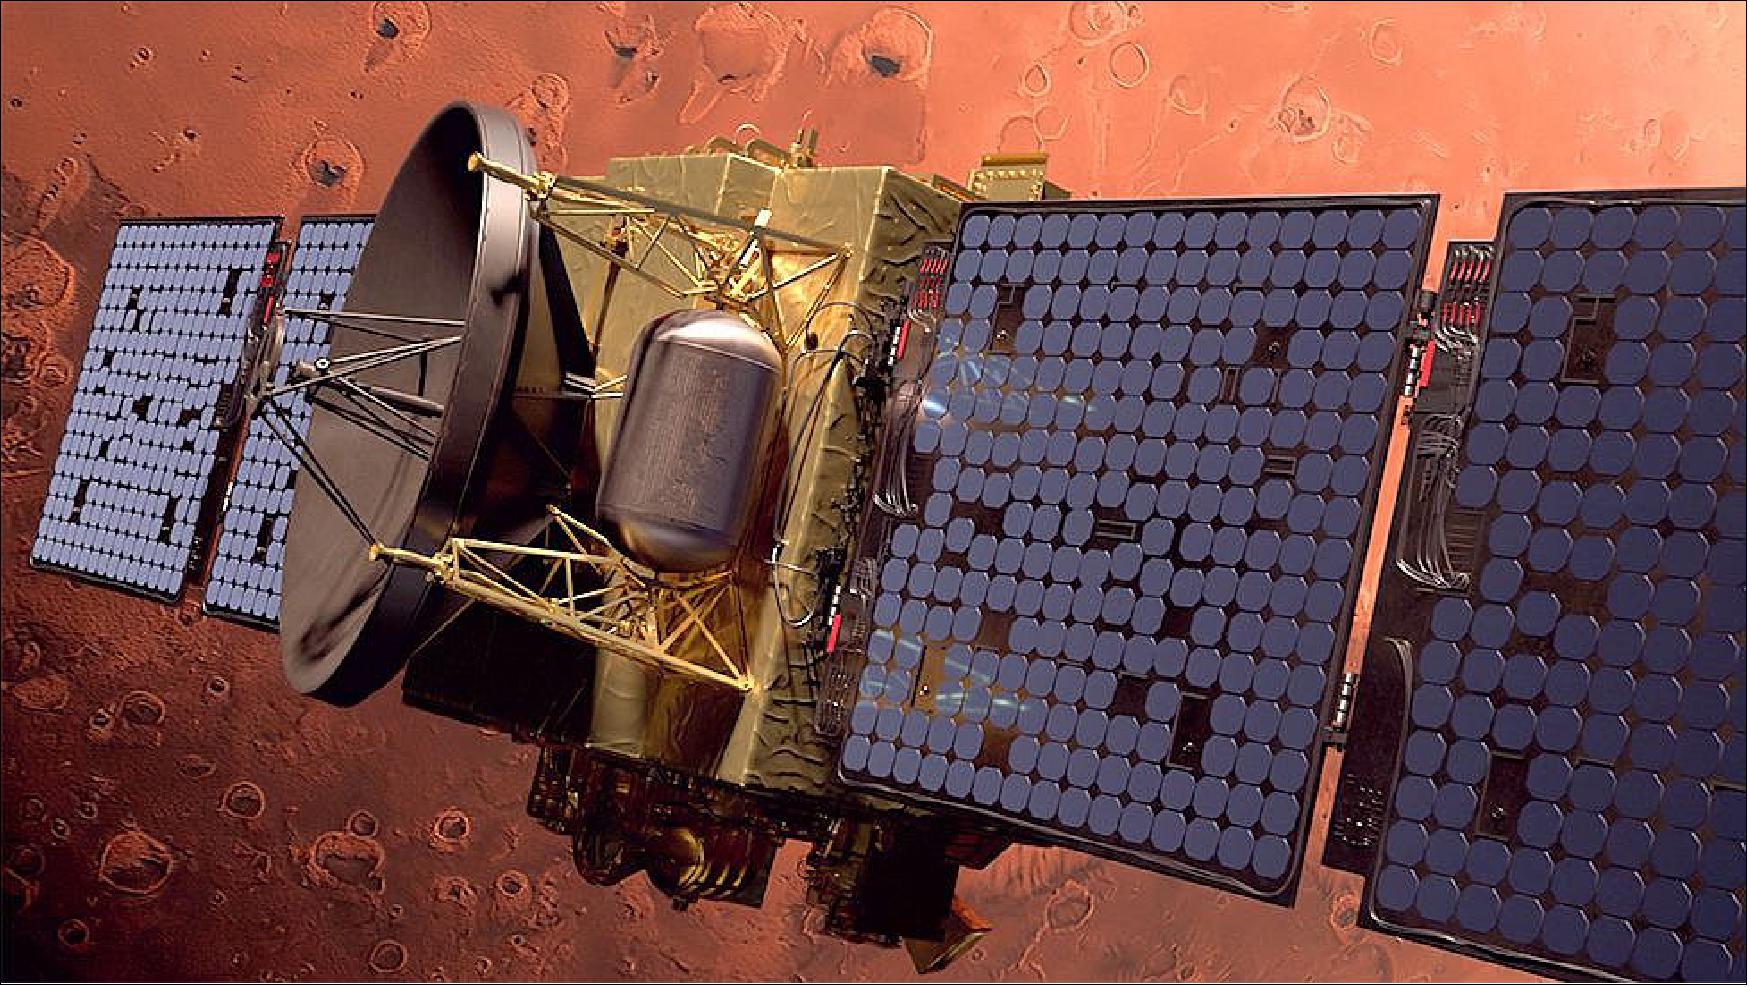 Figure 5: Artwork: The UAE is the first Arab nation in history to send a probe to Mars (image credit: MBRSC)